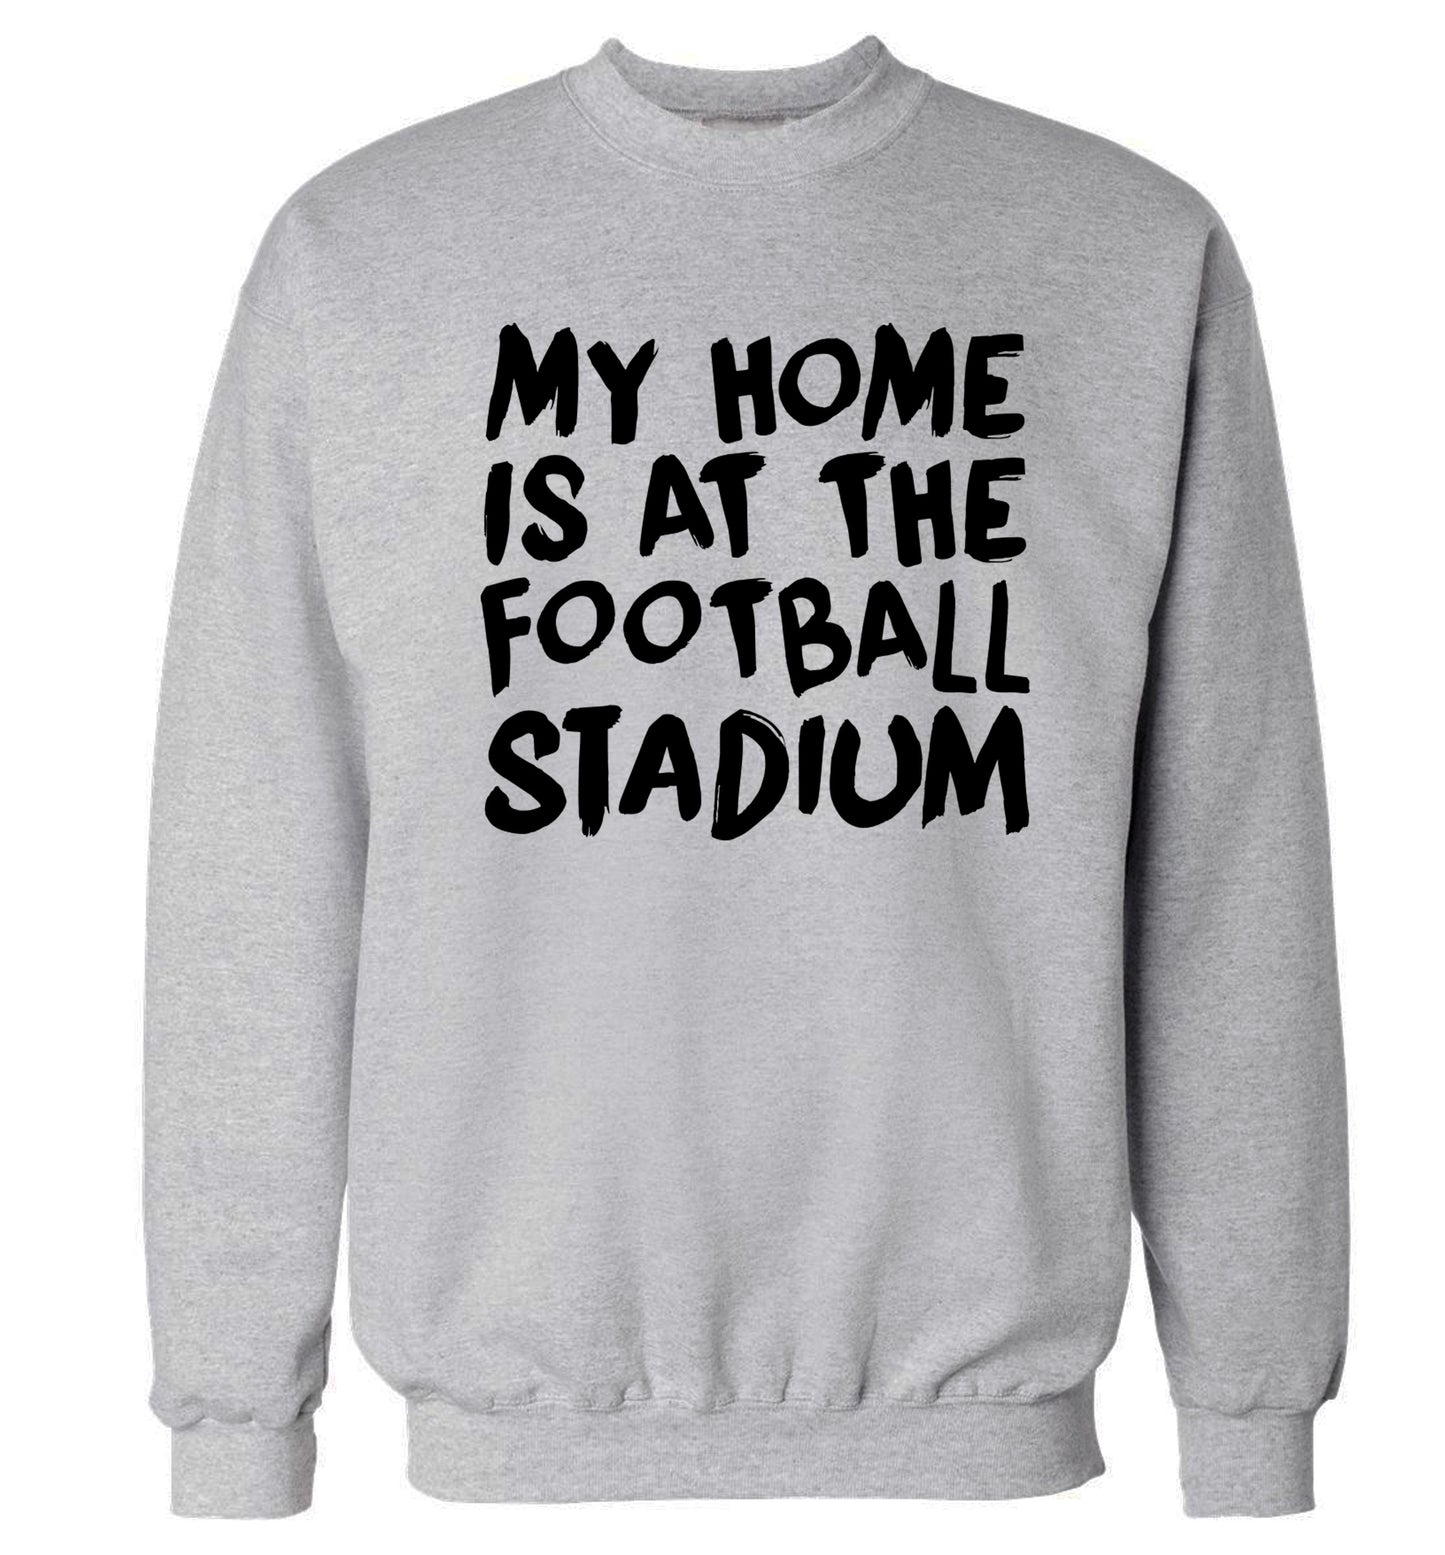 My home is at the football stadium Adult's unisex grey Sweater 2XL